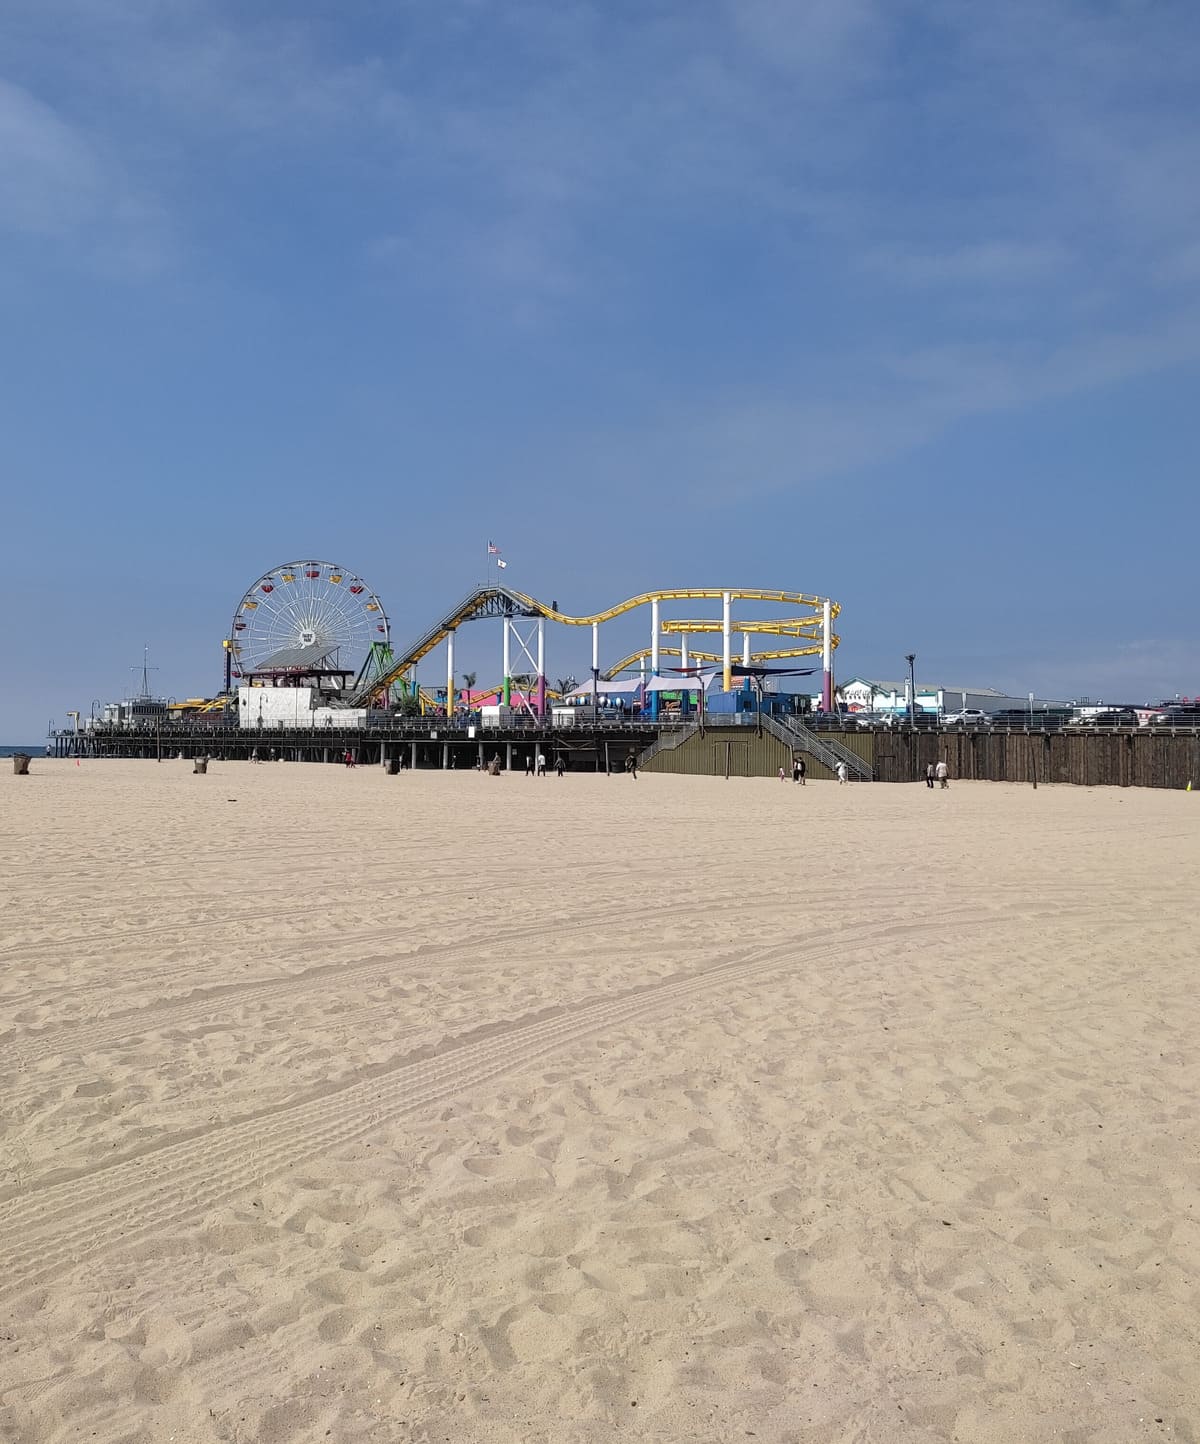 Santa Monica Pier offers rides, shops and restaurants but also plenty of free activities